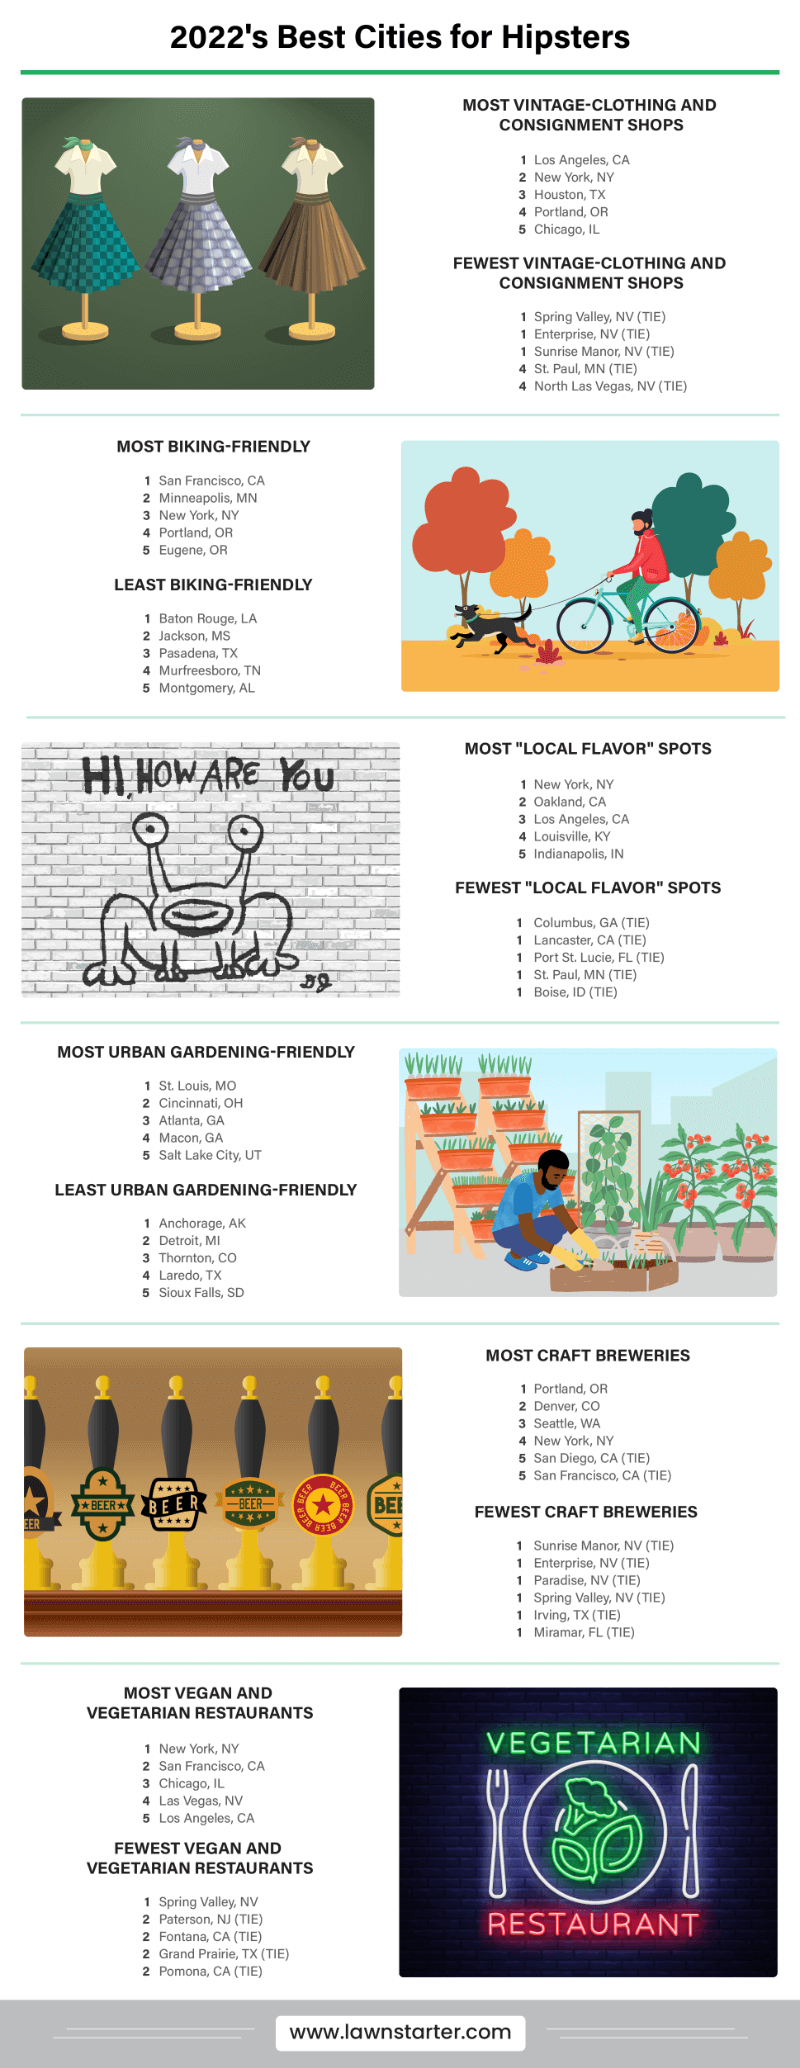 2022's Best Cities for Hipsters Infographic is based on vintage clothes, biking friendliness, local flavor shops and more!